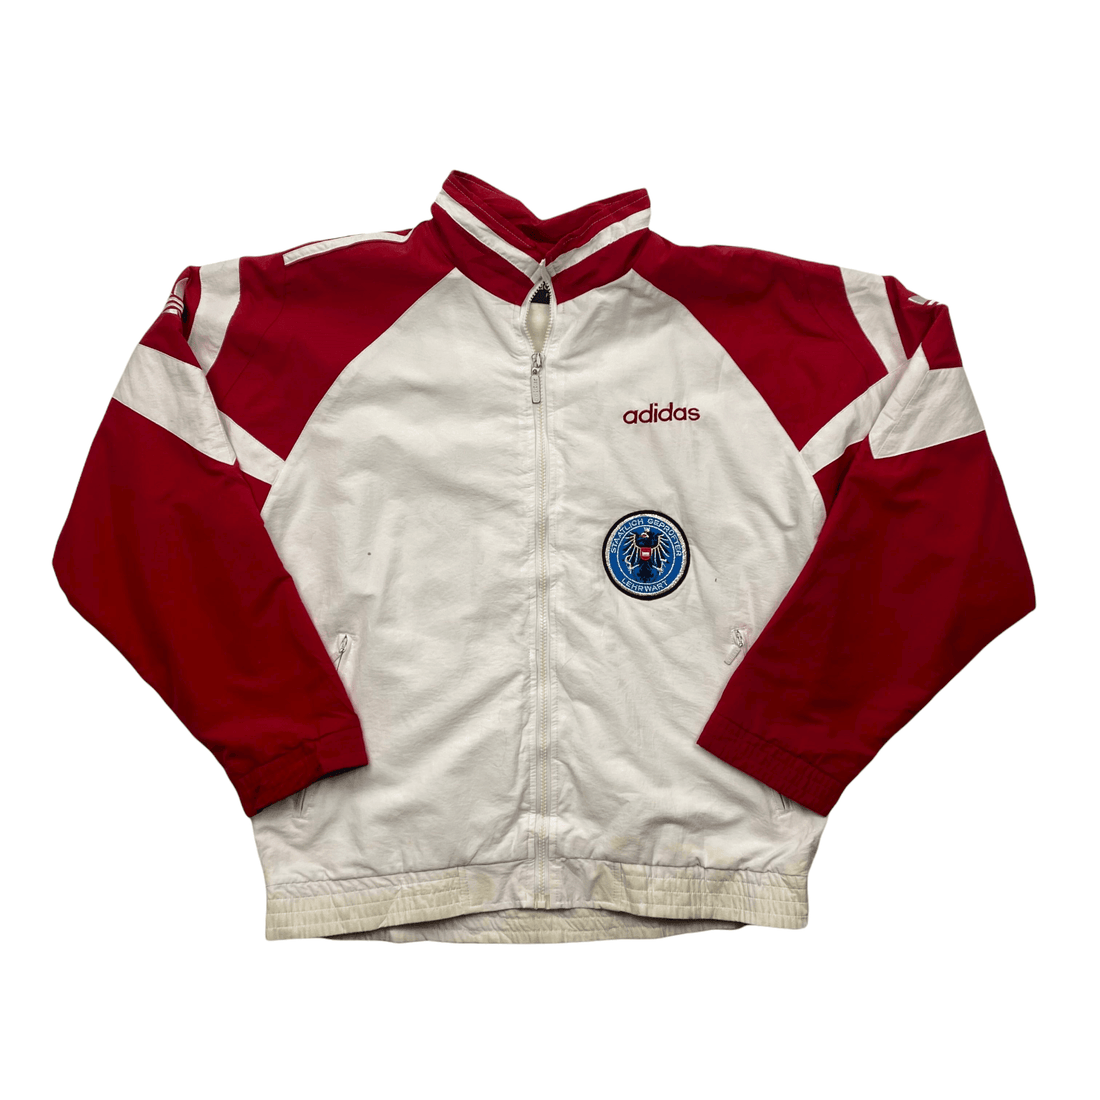 Vintage 90s White + Red Adidas Spell-Out Jacket - Large - The Streetwear Studio